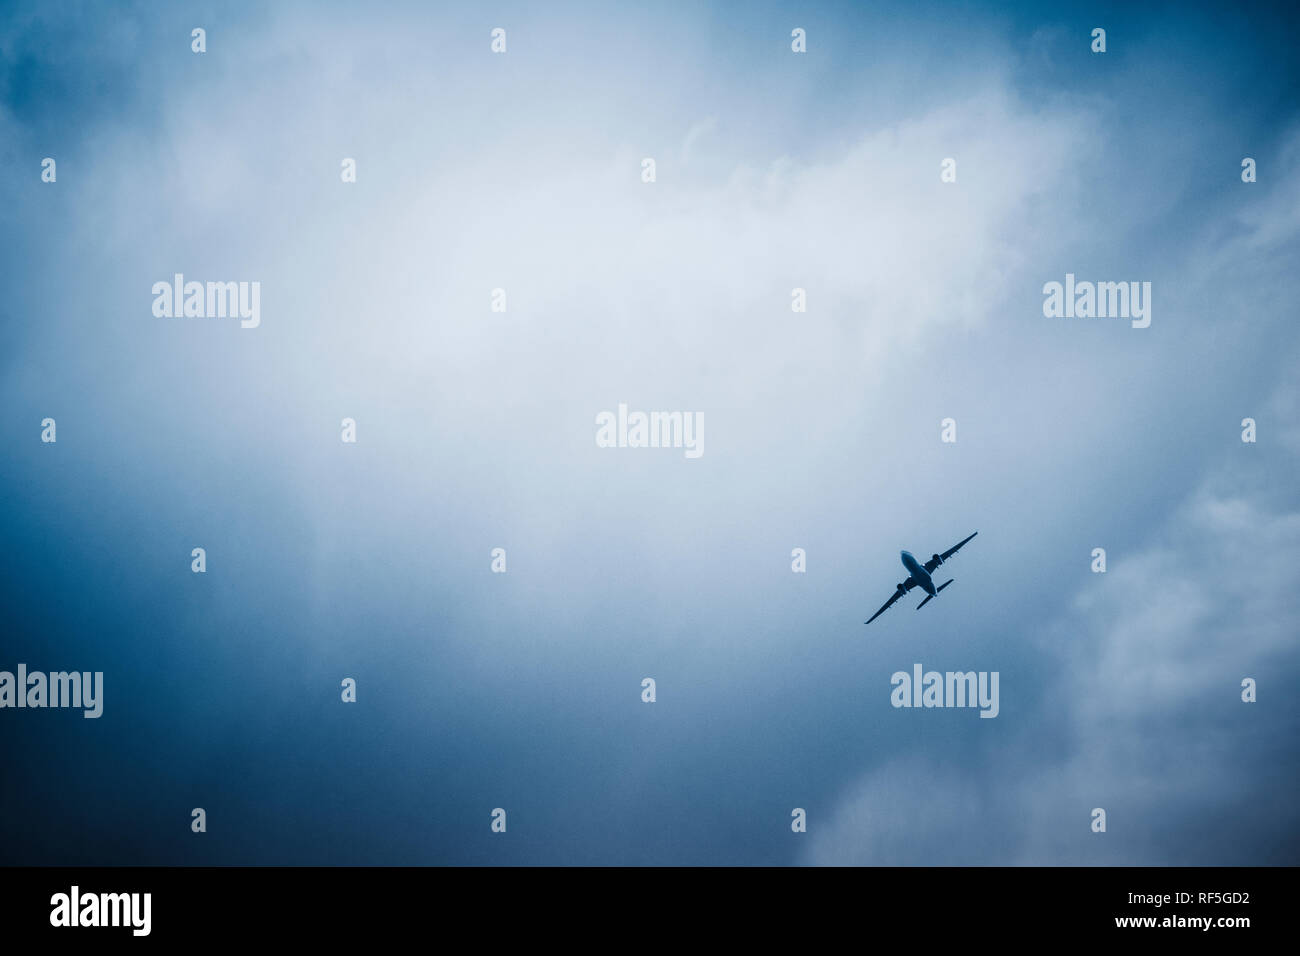 airplane in the sky, blue toned images. Stock Photo